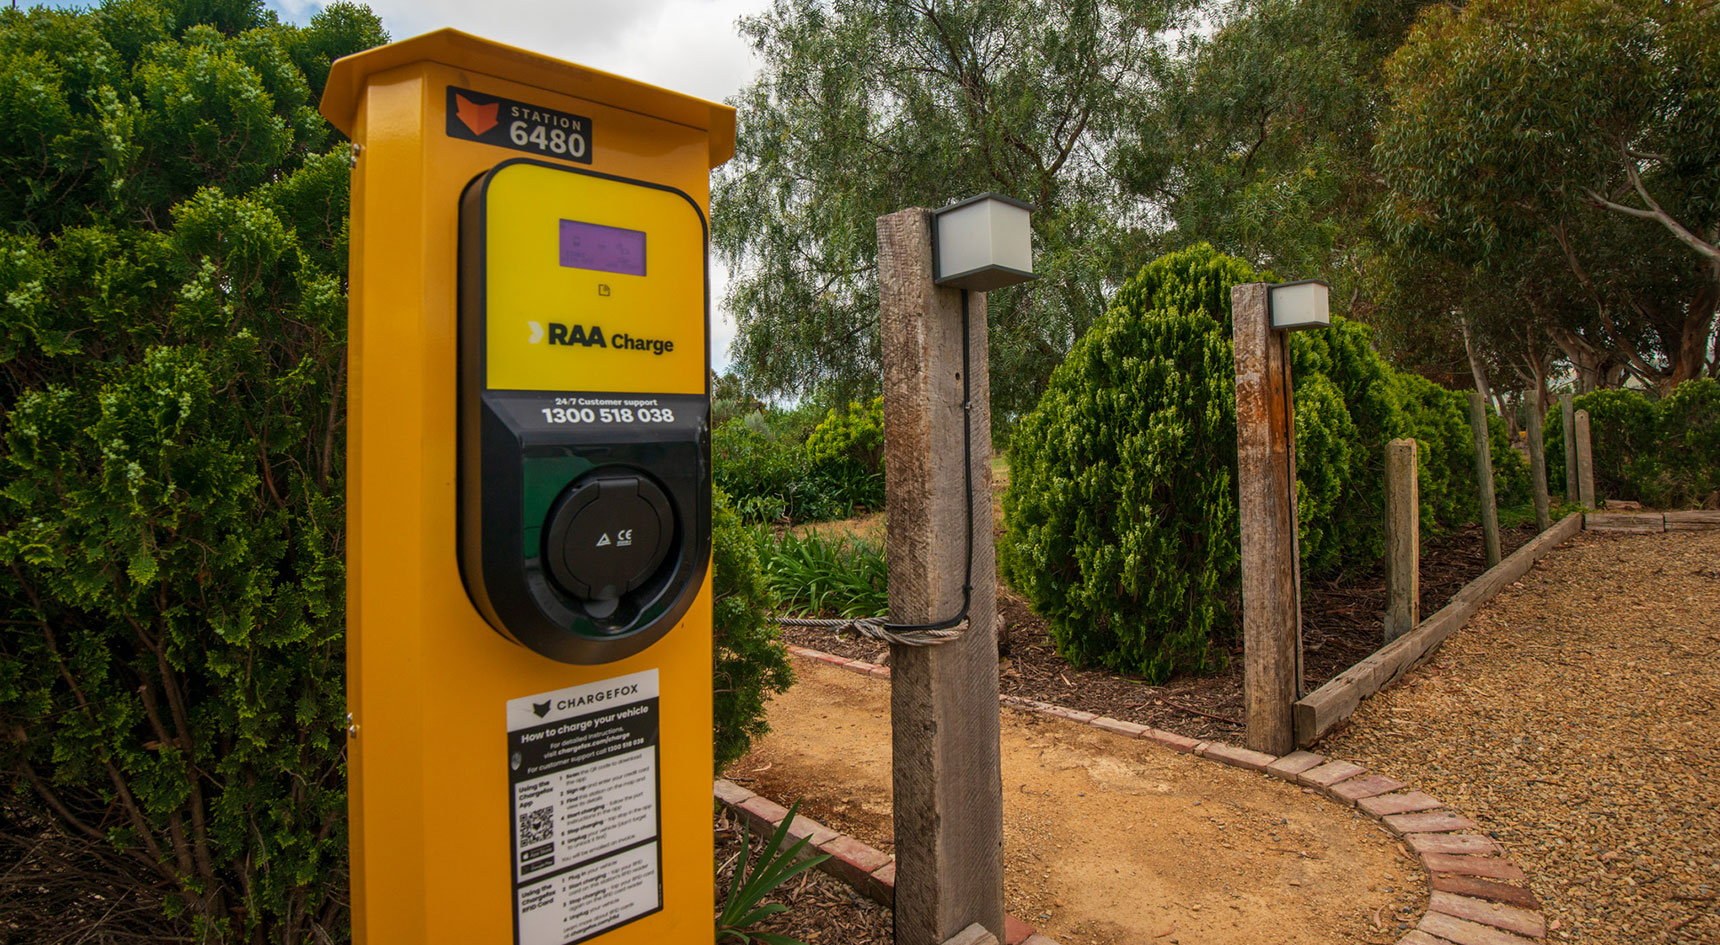 RAA charger surrounded by trees